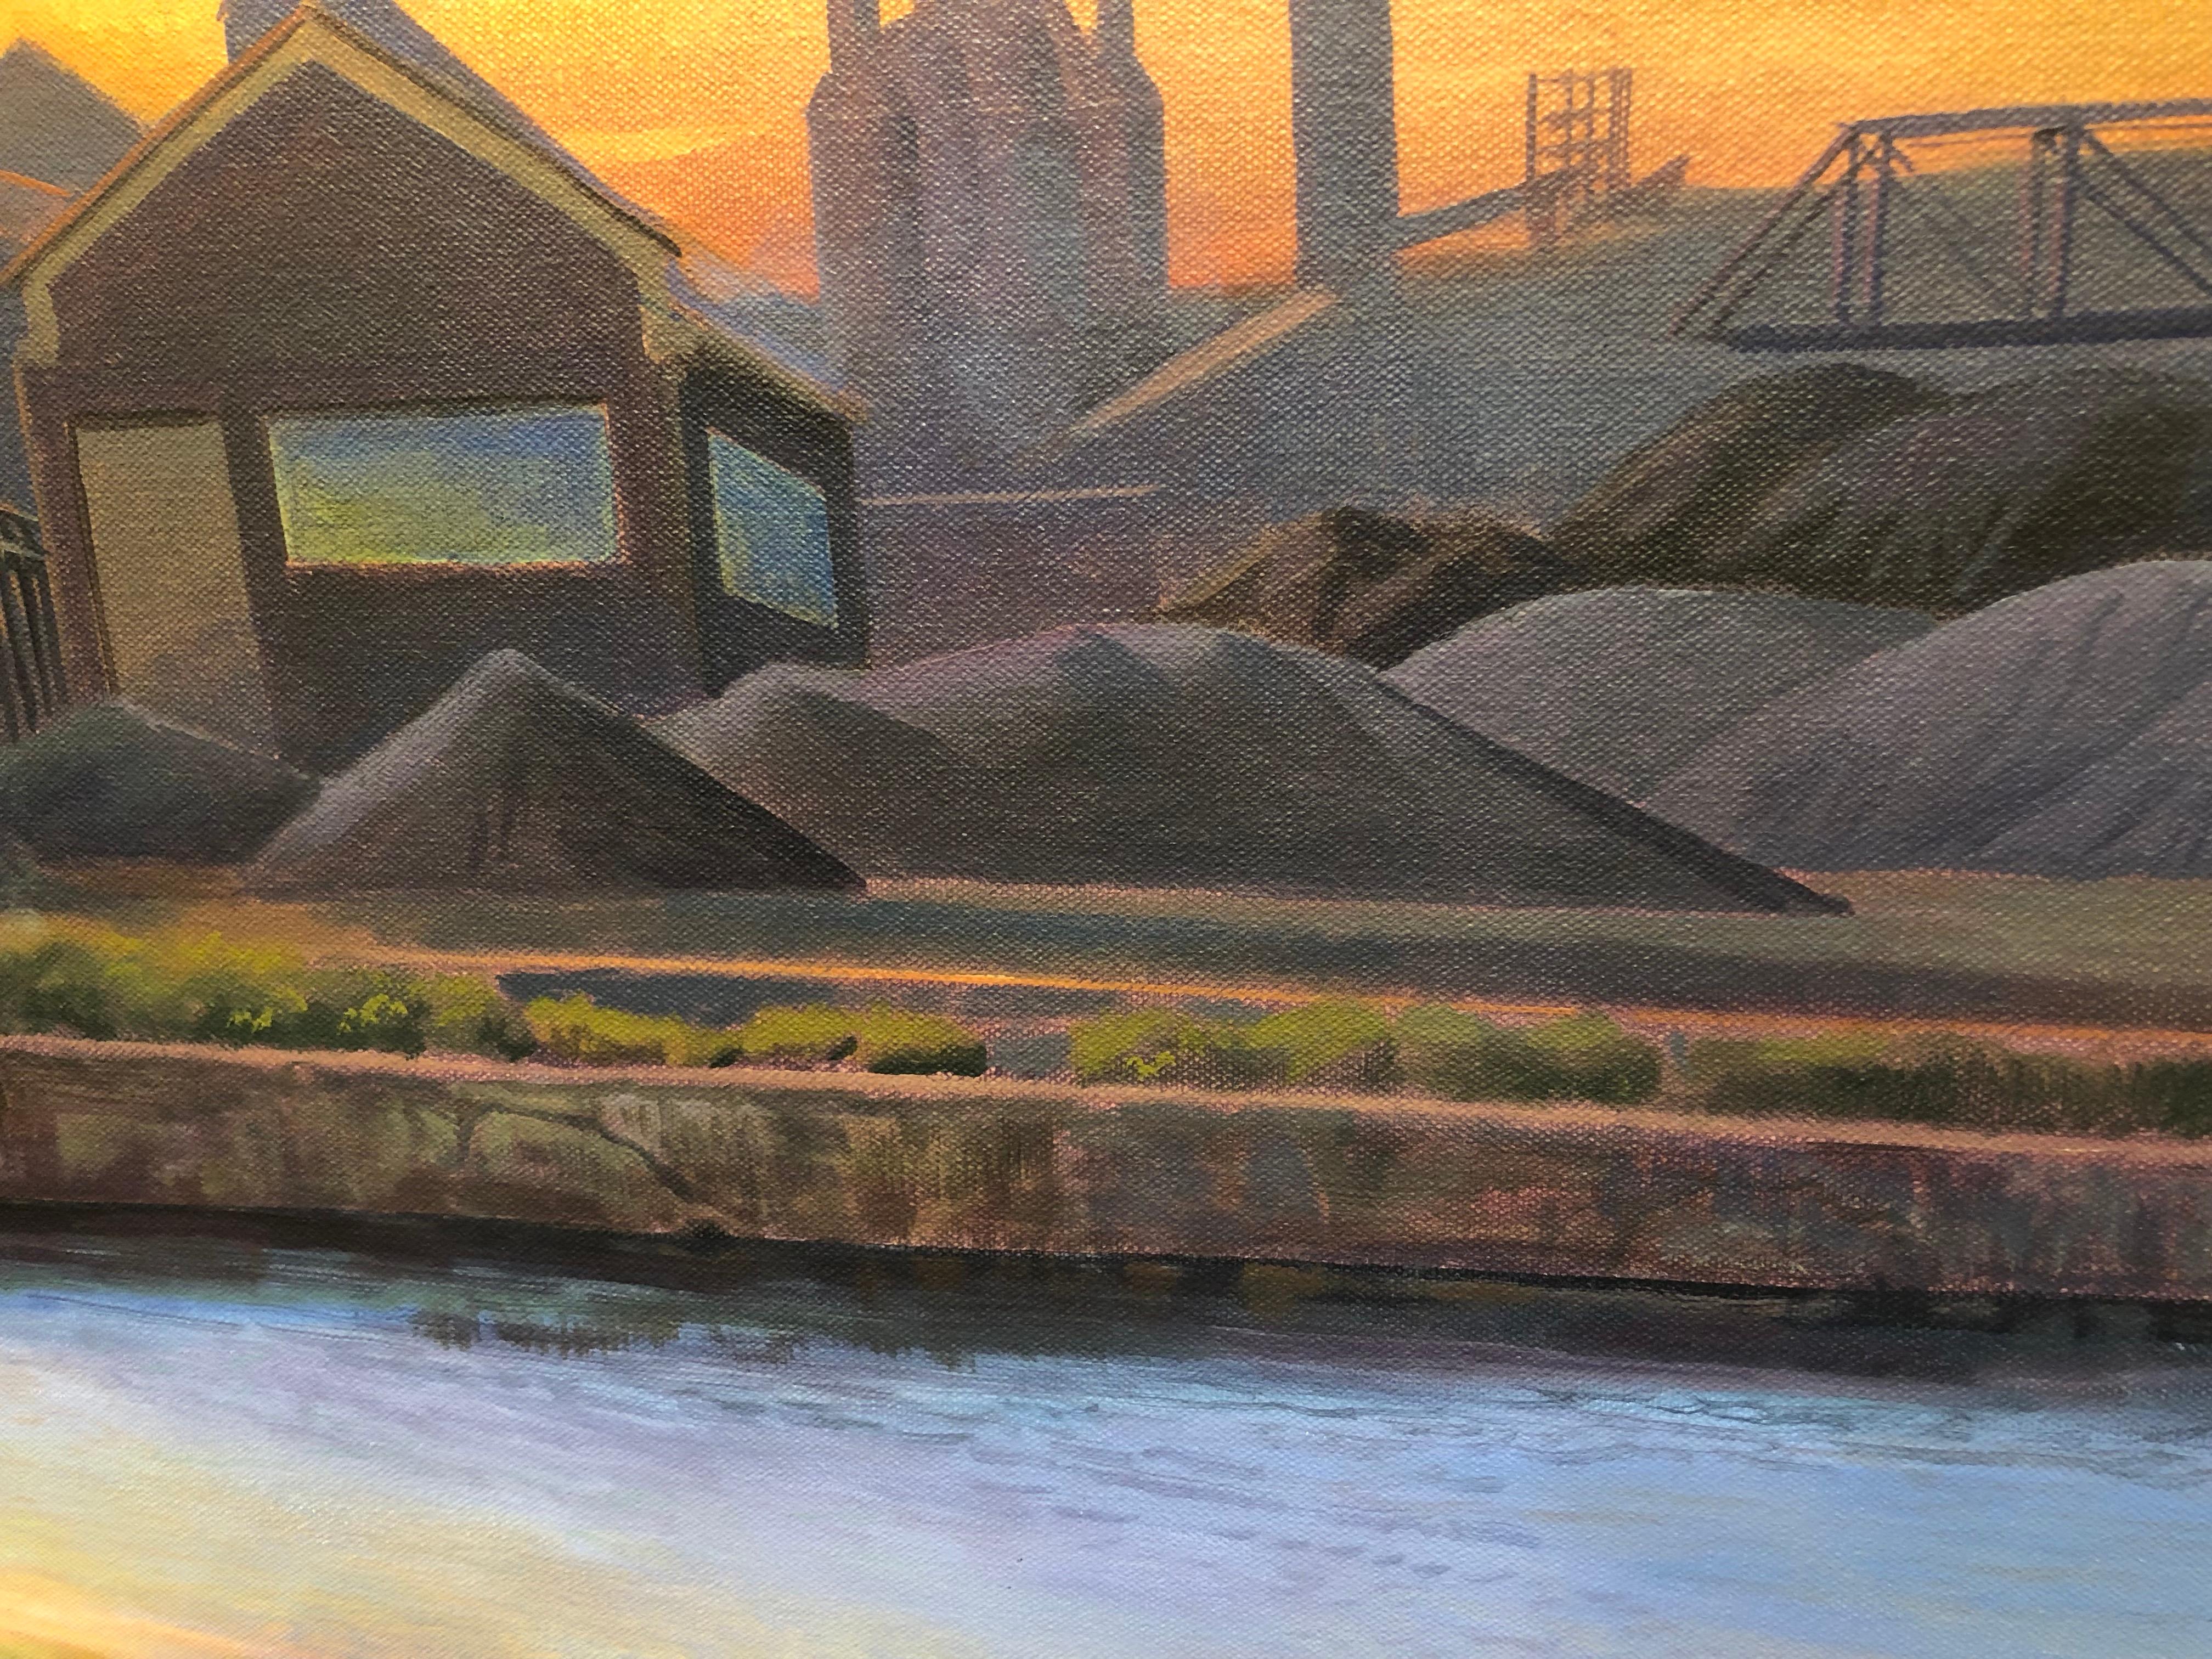 American Landscape - Iconic American Steel Mill Bathed in Orange Sunset Light - Contemporary Painting by Art Chartow